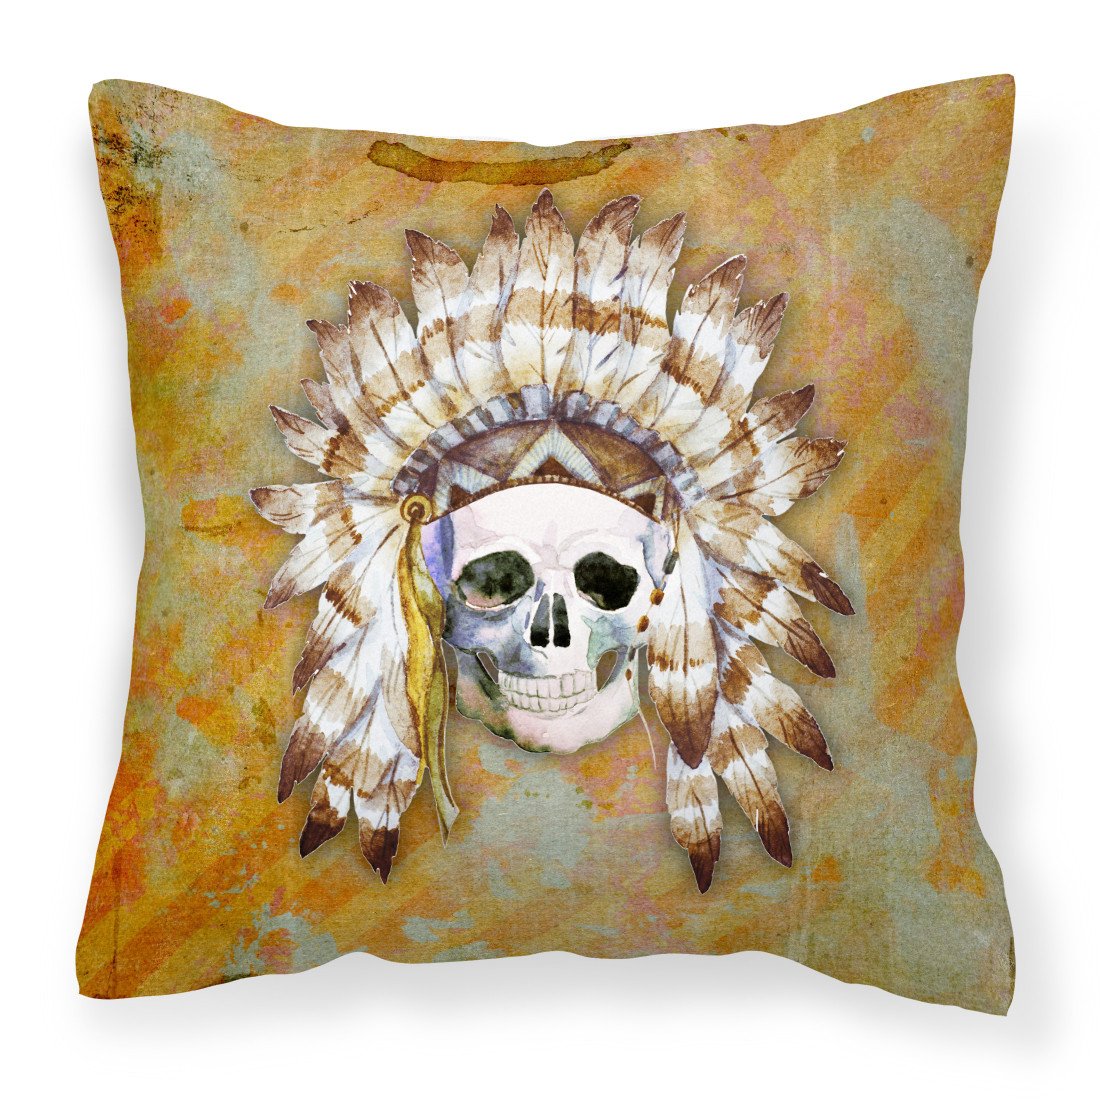 Day of the Dead Indian Skull Fabric Decorative Pillow BB5121PW1818 by Caroline's Treasures